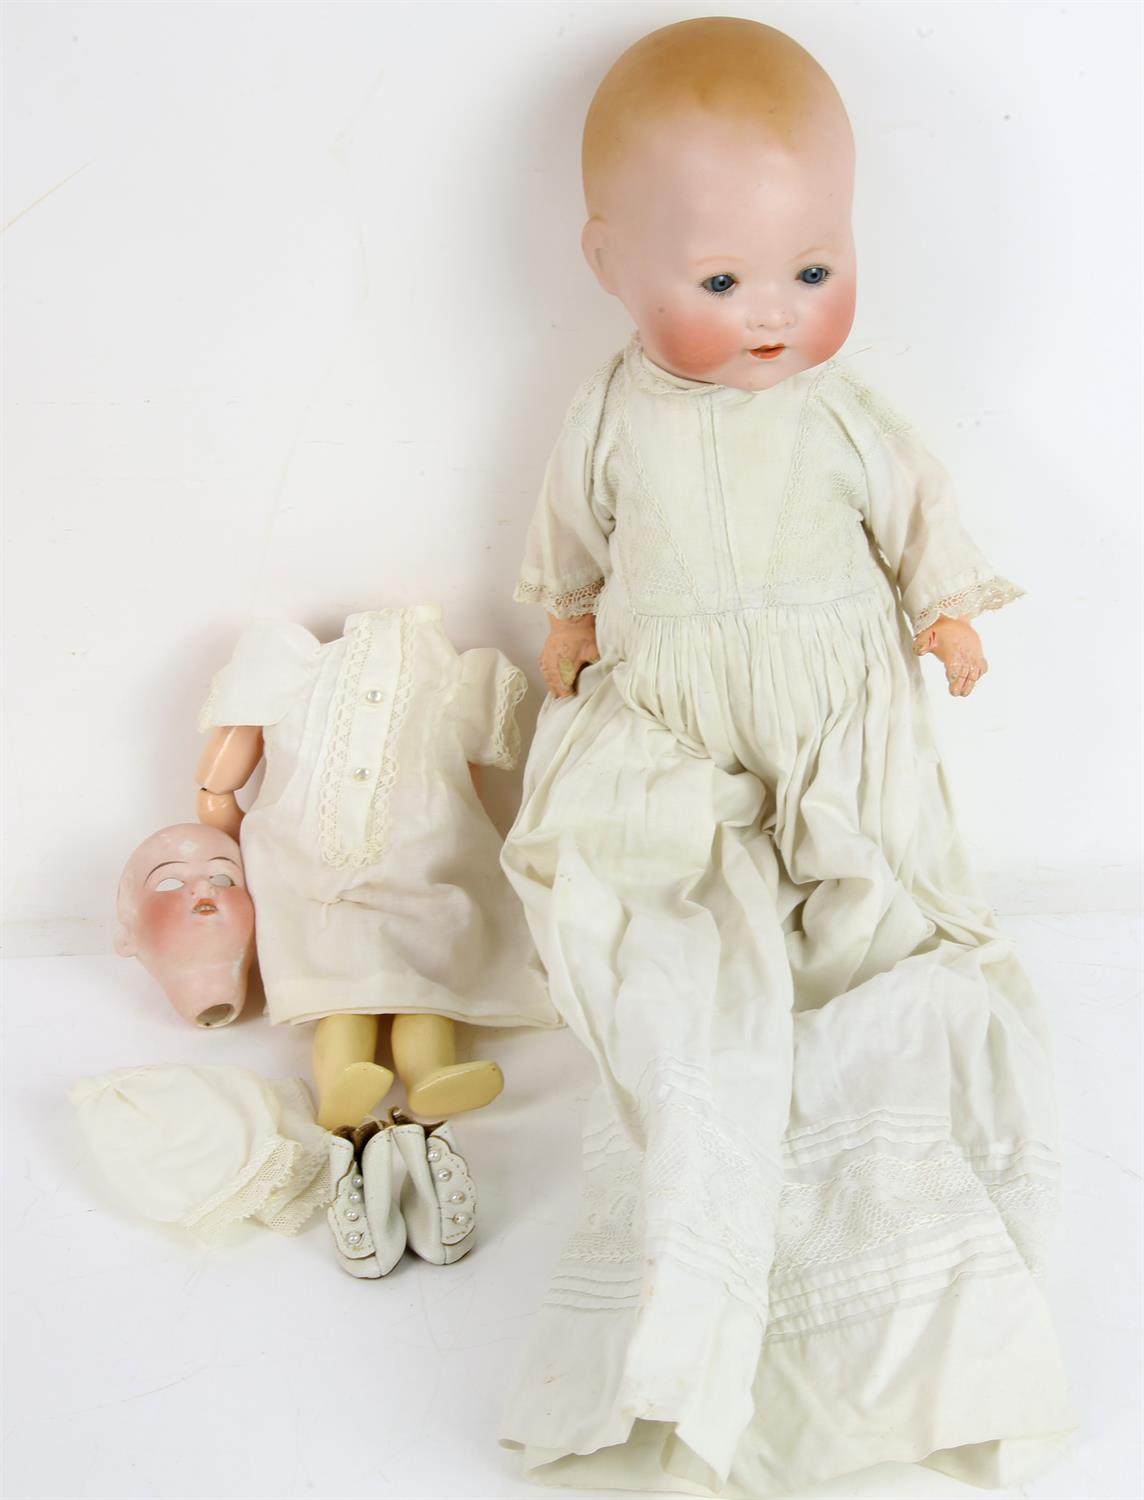 Armand Marseille AM390 bisque headed girl doll with sleeping brown eyes and open mouth, - Image 4 of 12